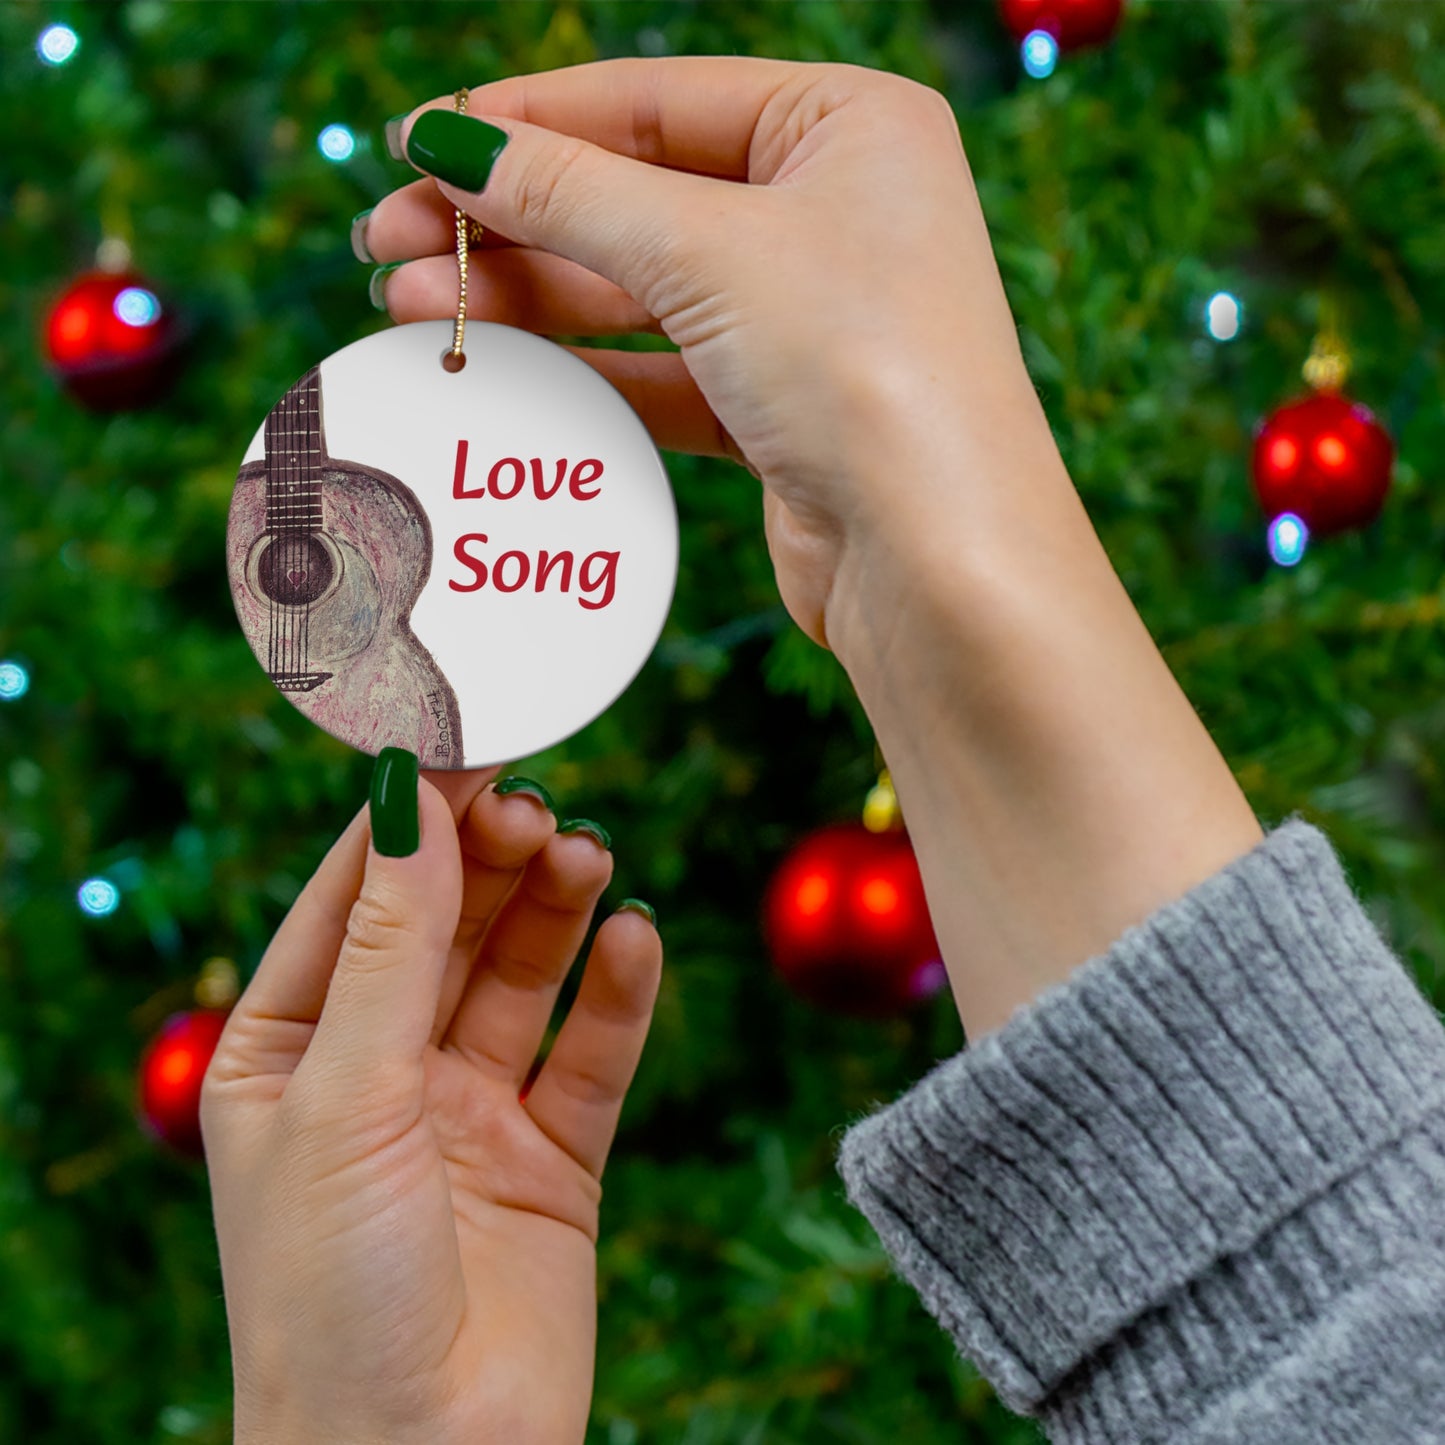 Love Song Ceramic Ornament, 4 Shapes